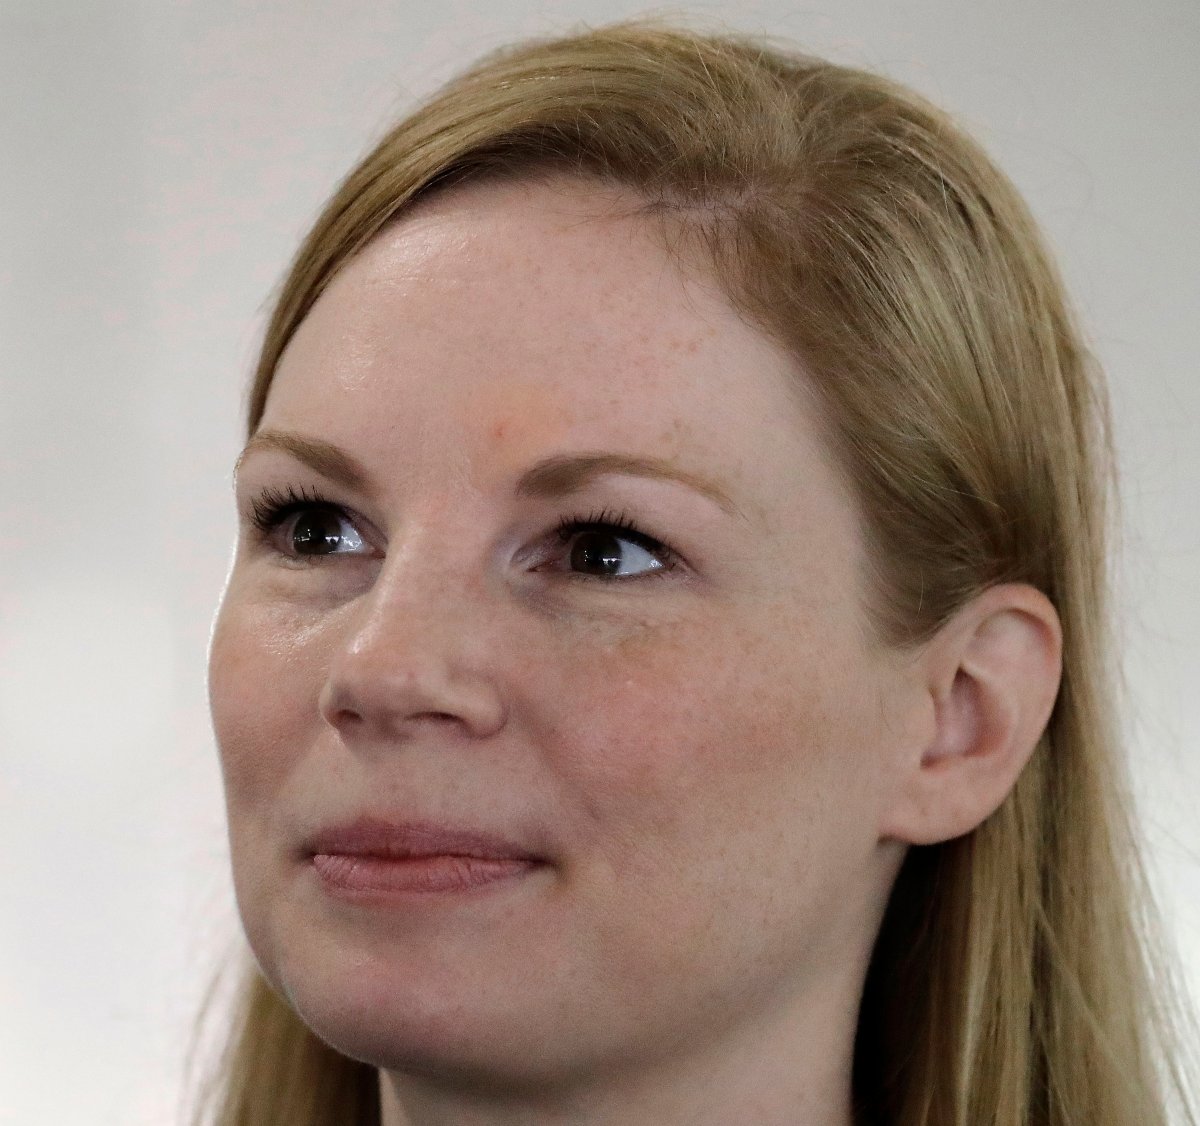 FILE - In this Aug. 17, 2018, file photo, Missouri State Auditor Nicole Galloway appears in Sedalia, Mo.